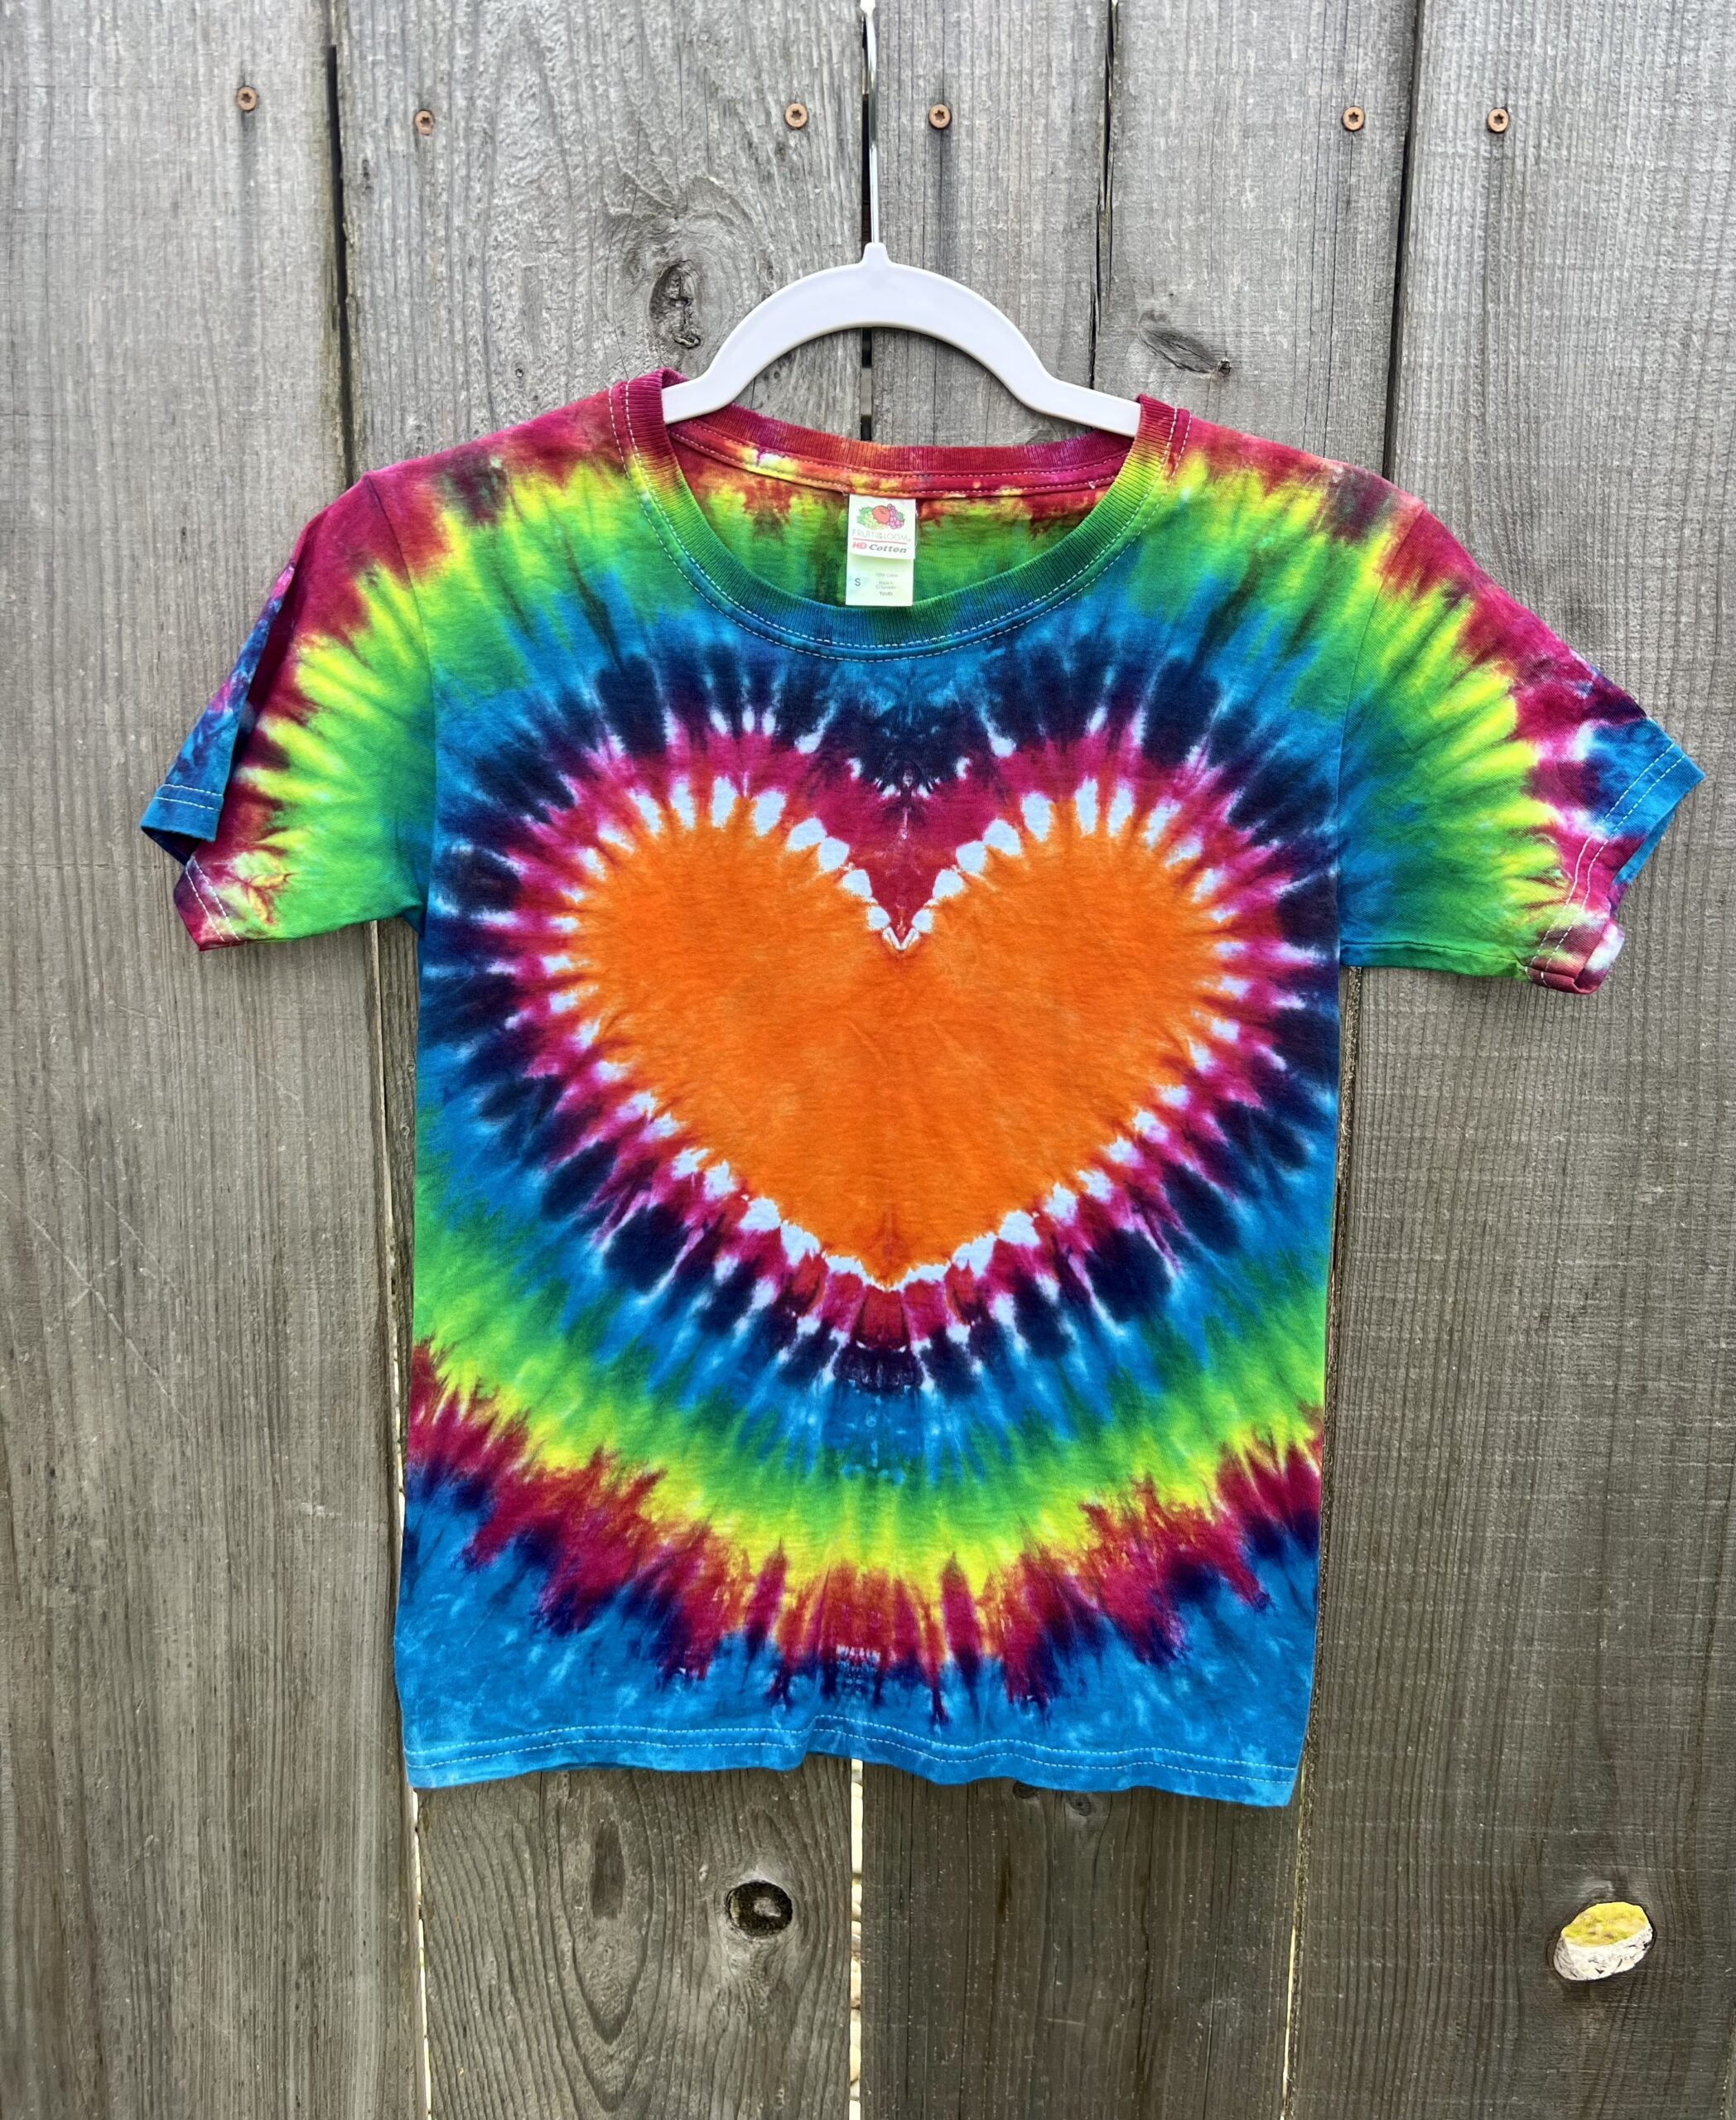 Buy Tie Dye Tee Shirt for Boys or Girls Hand Dyed in Primary Rainbow Colors  Toddler Size XS 2T-4T Online in India 